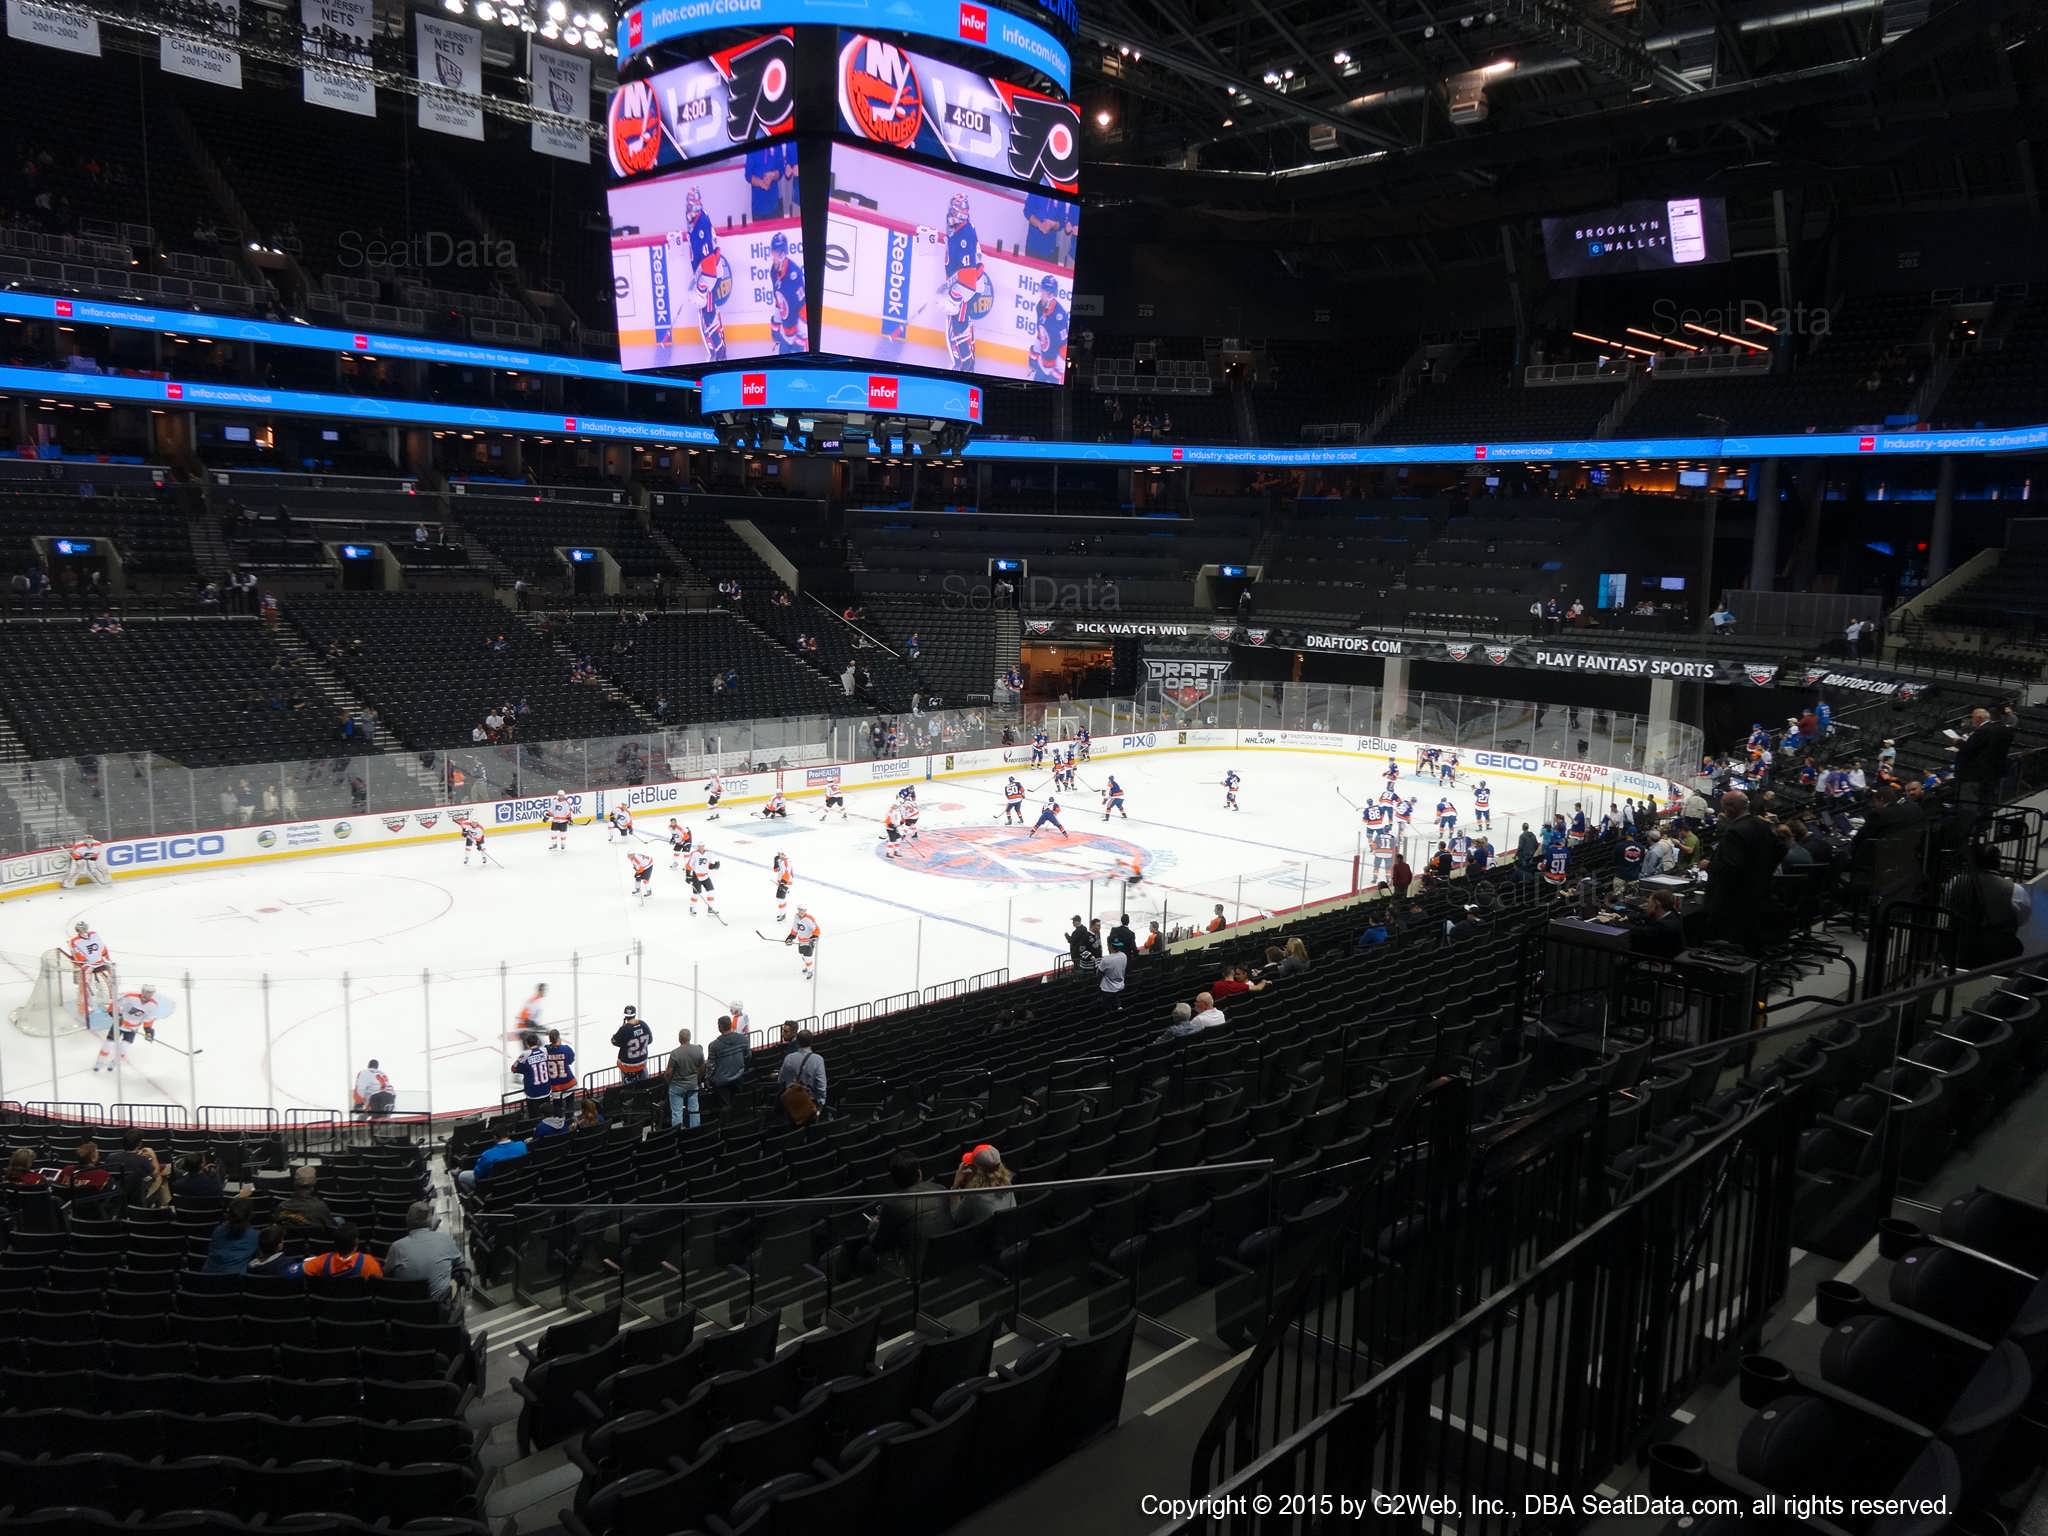 Seat View from Section 111 at the Barclays Center, home of the New York Islanders